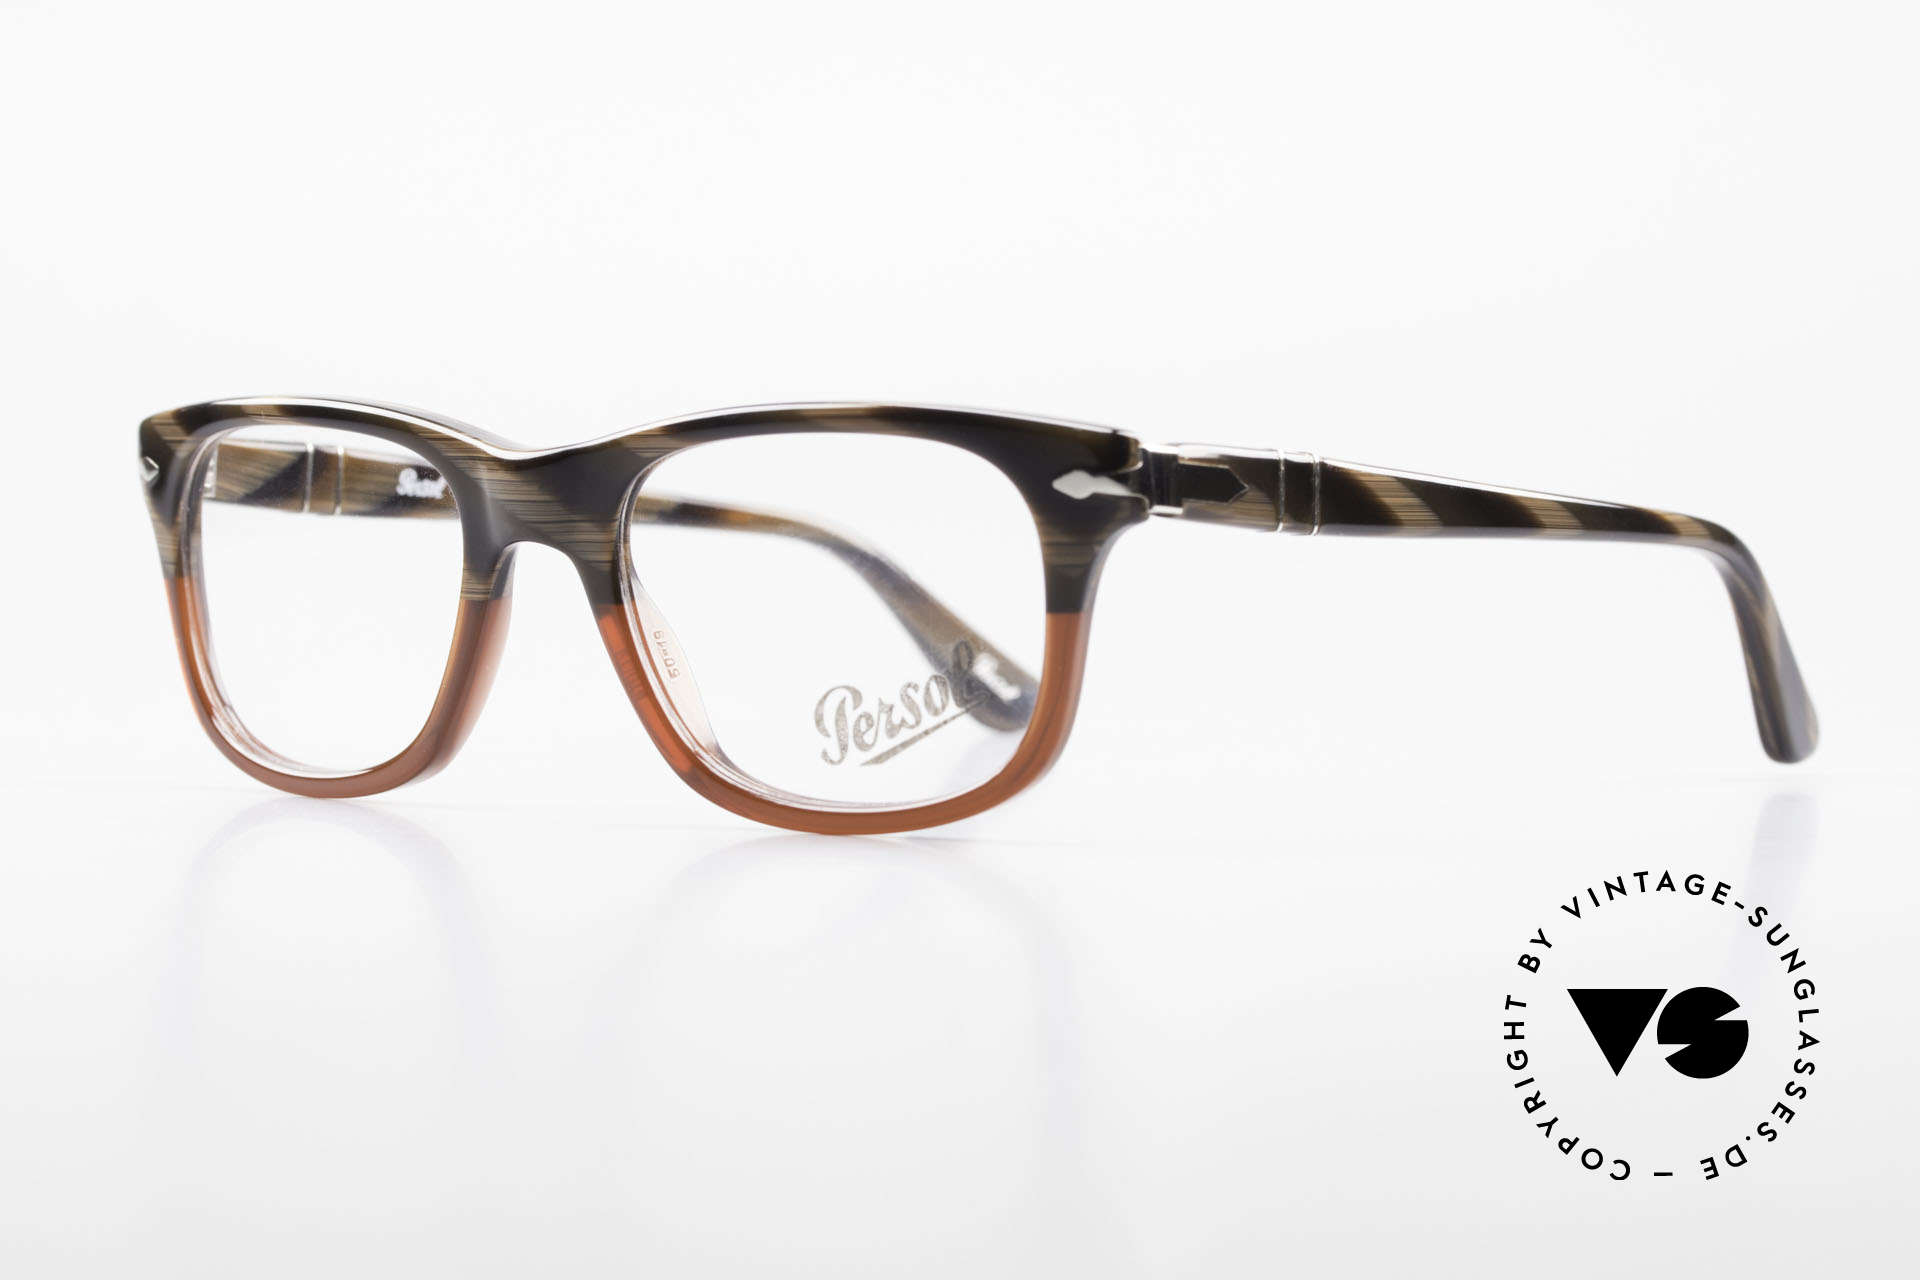 Persol 3029 Small Persol Eyeglasses Unisex, unworn (like all our classic PERSOL eyeglasses), Made for Men and Women